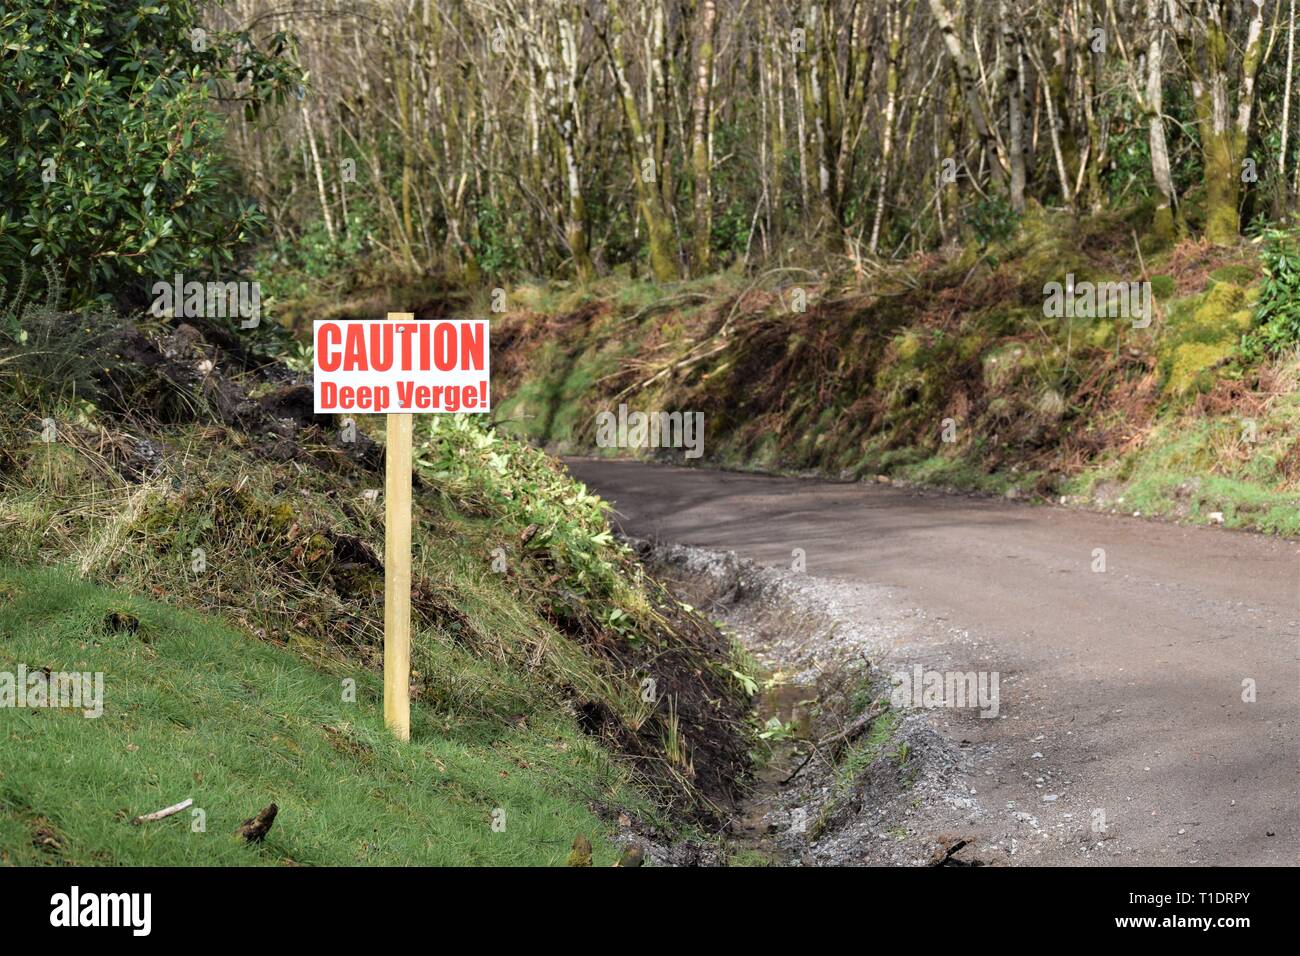 Caution warning sign by verge ditch of a new dirt road curving to the left with small tree trunks in background. Stock Photo